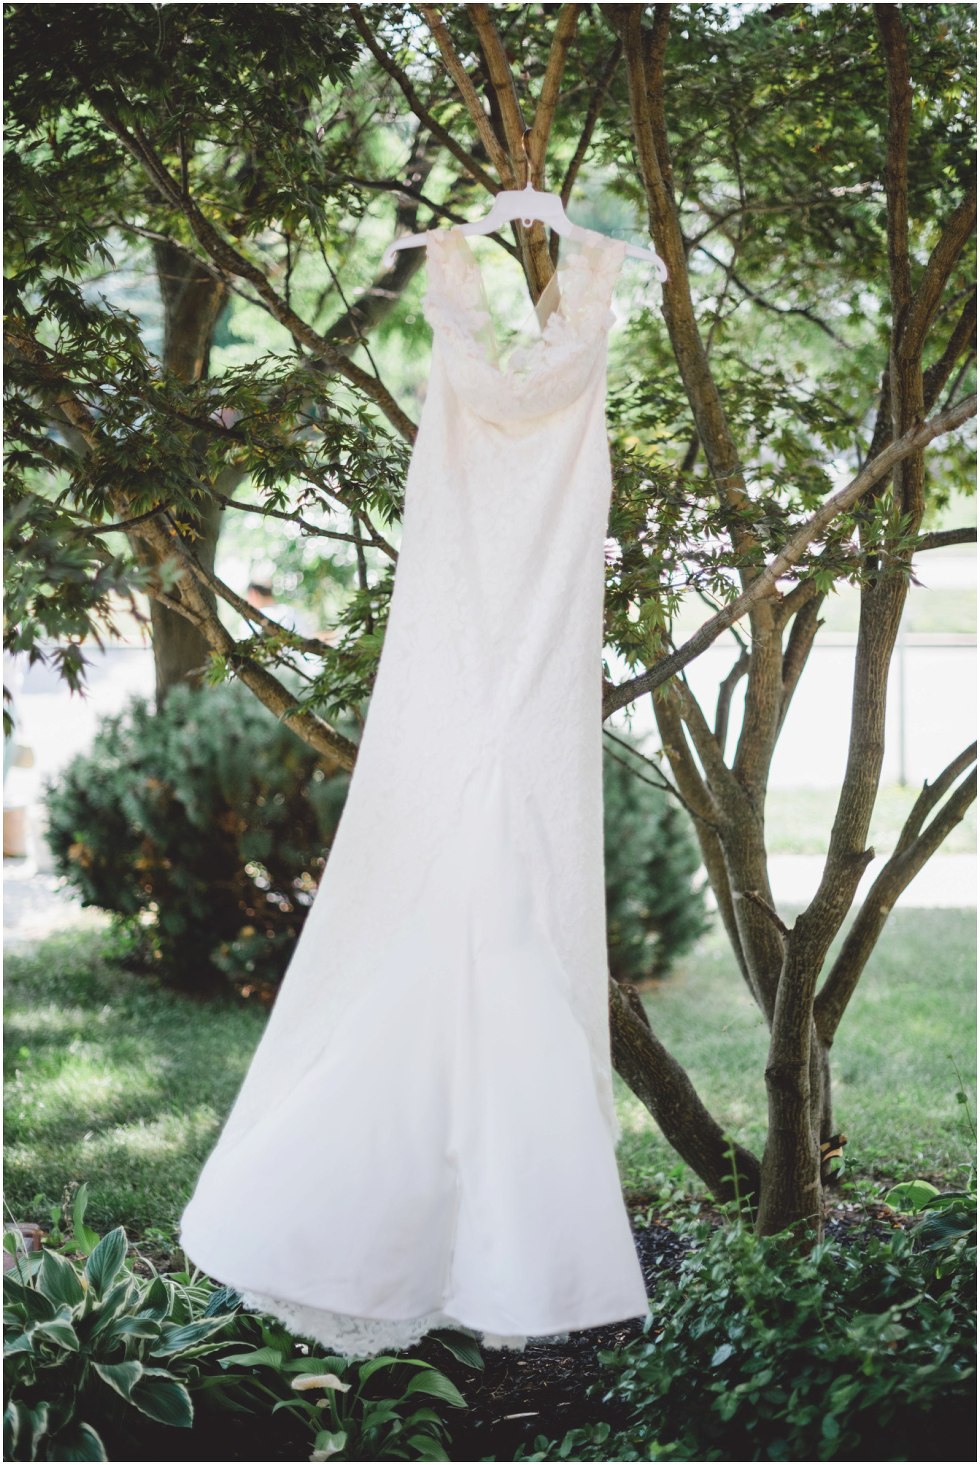 Brides dress swaying in the wind as it hangs from a tree